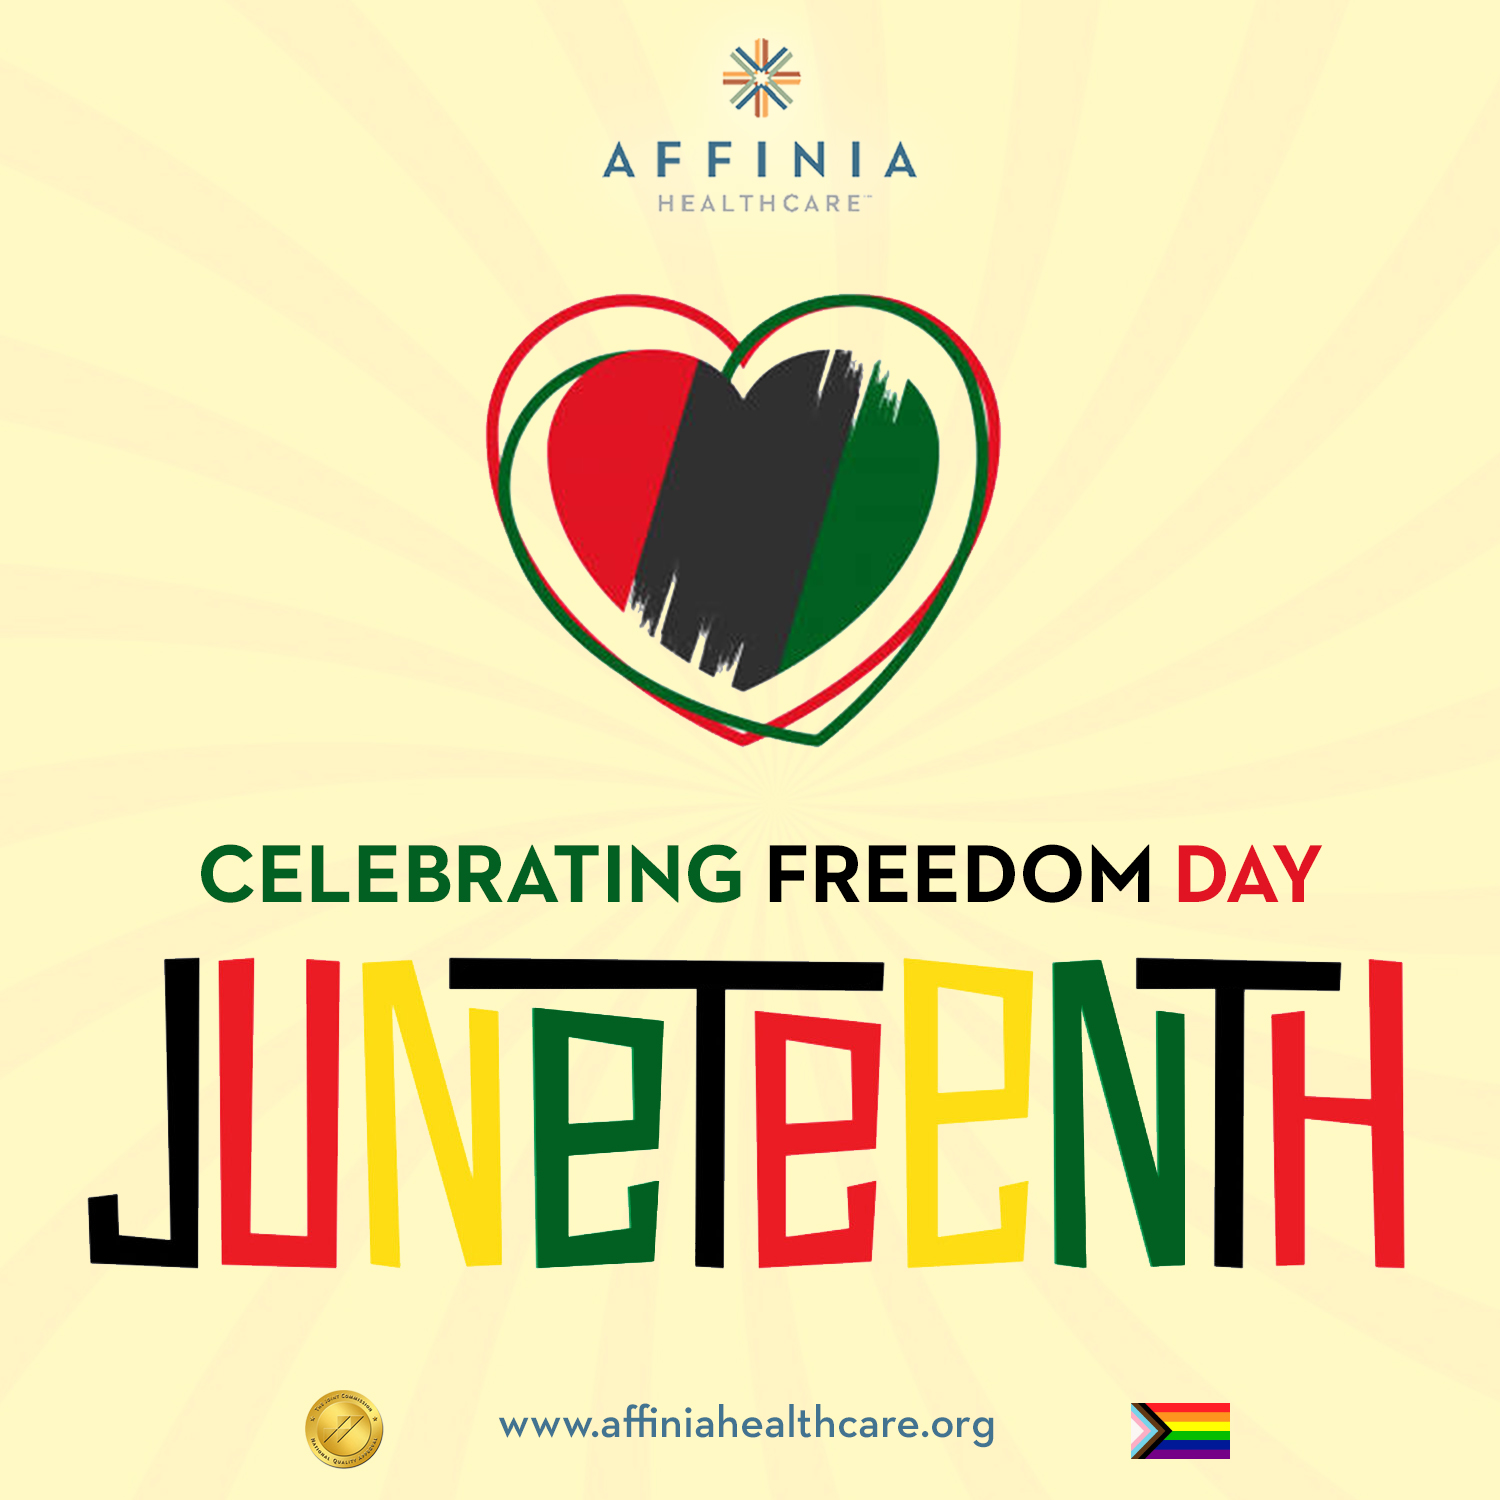 affinia healthcare closed june 19 for juneteenth